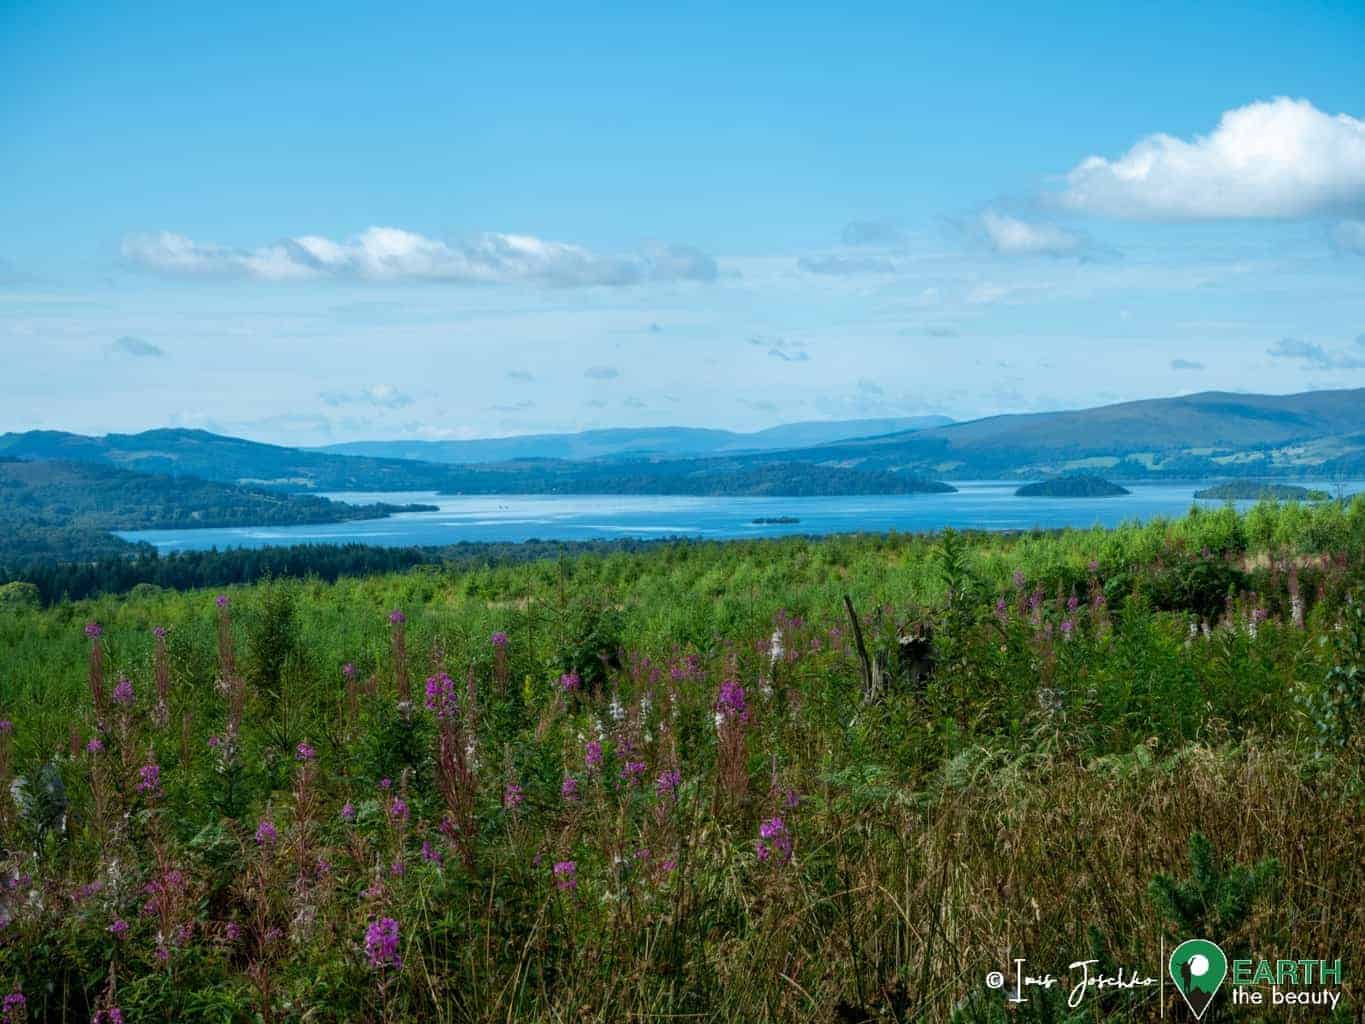 blue lake (loch lomond) on a sunny day with flowers and meadow